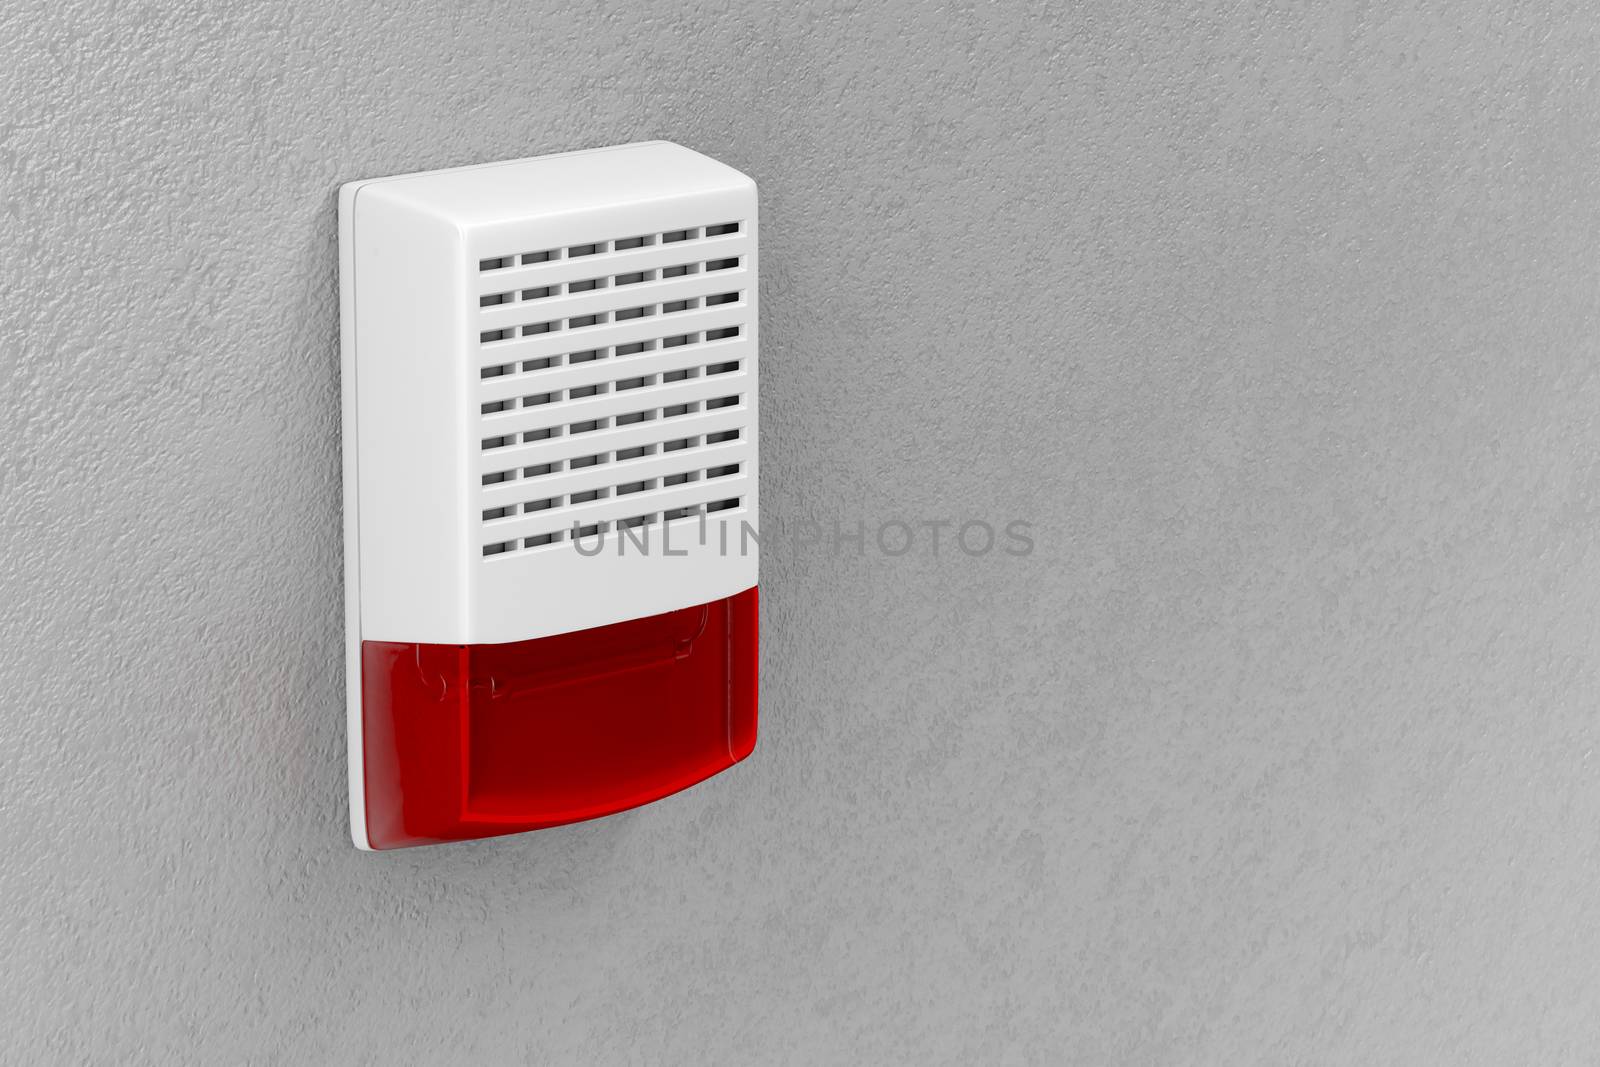 Alarm siren with flash light attached on wall